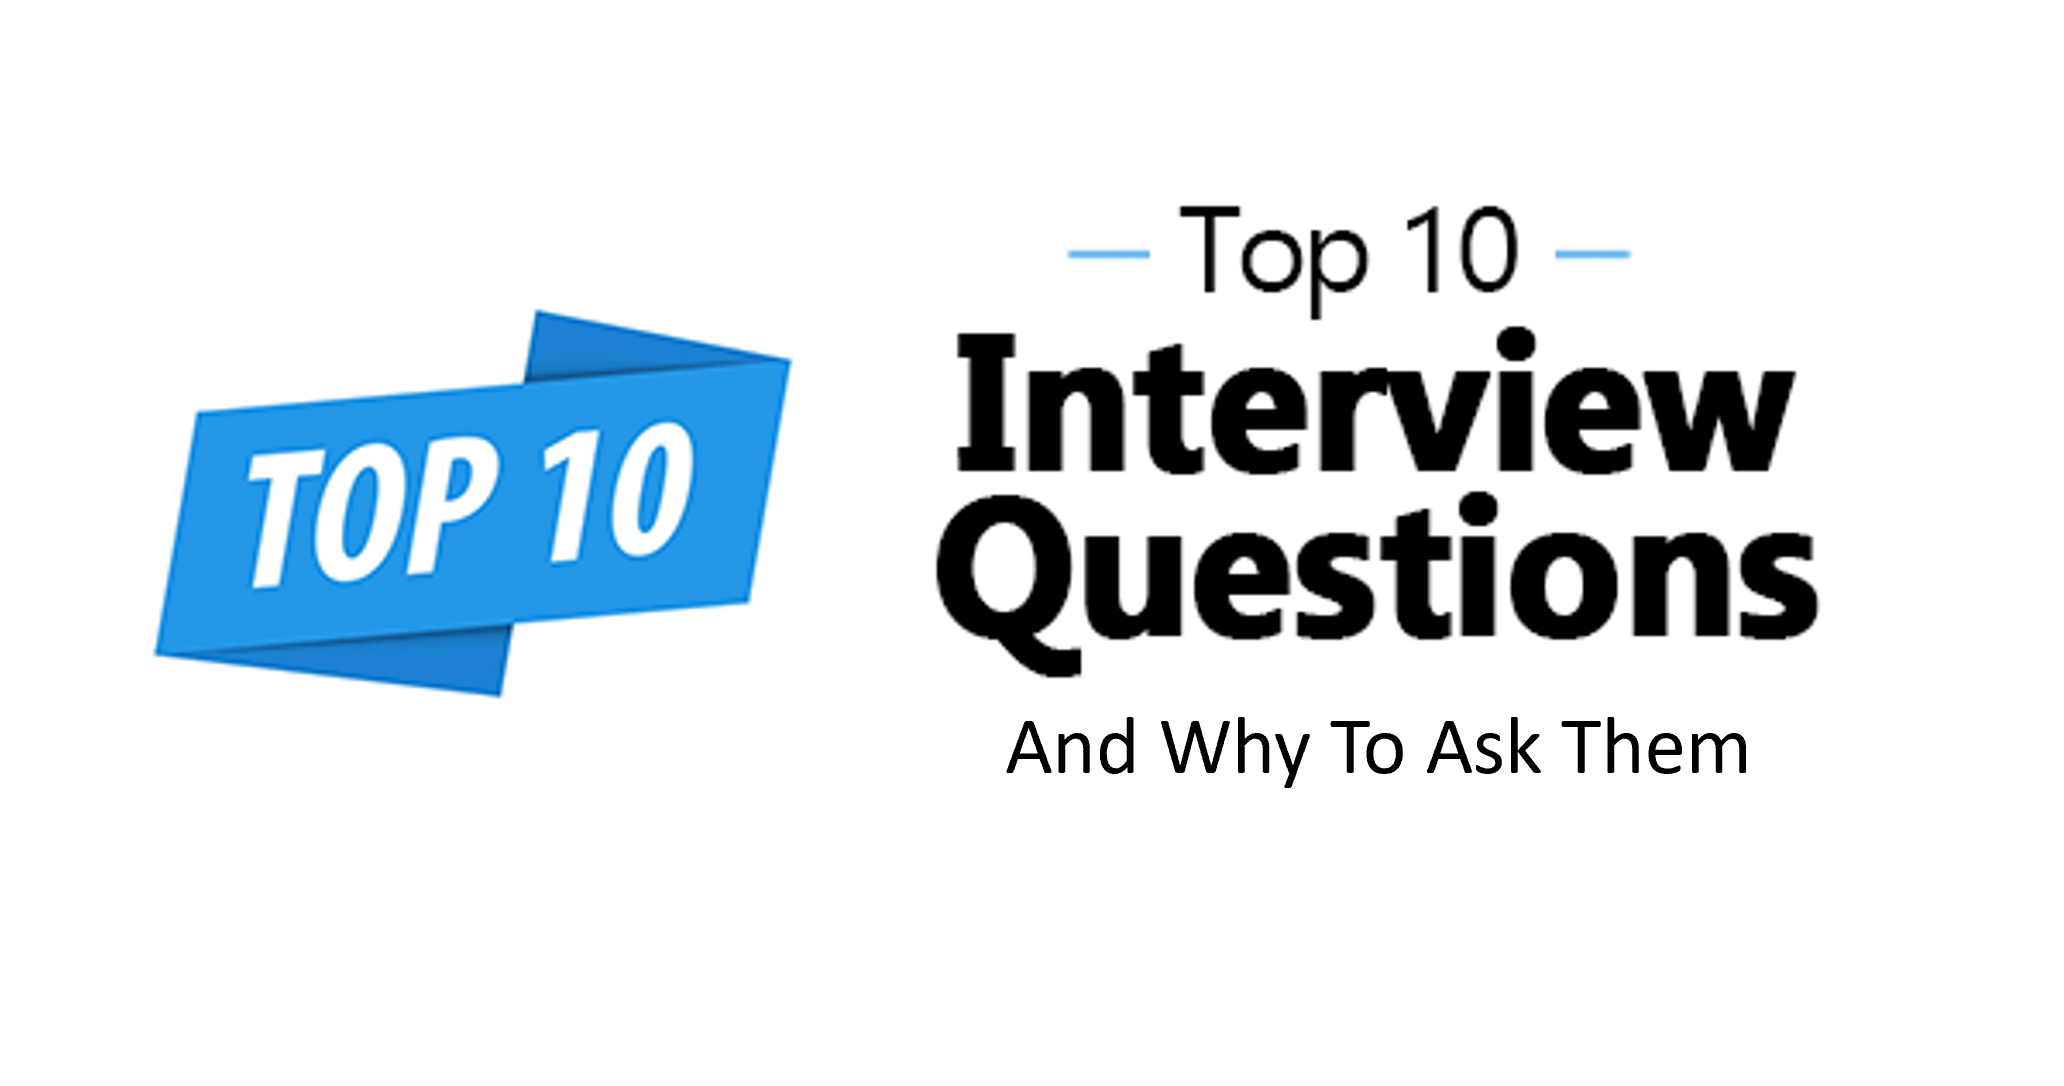 Top 10 Interview Questions for Strategic Sourcing Roles